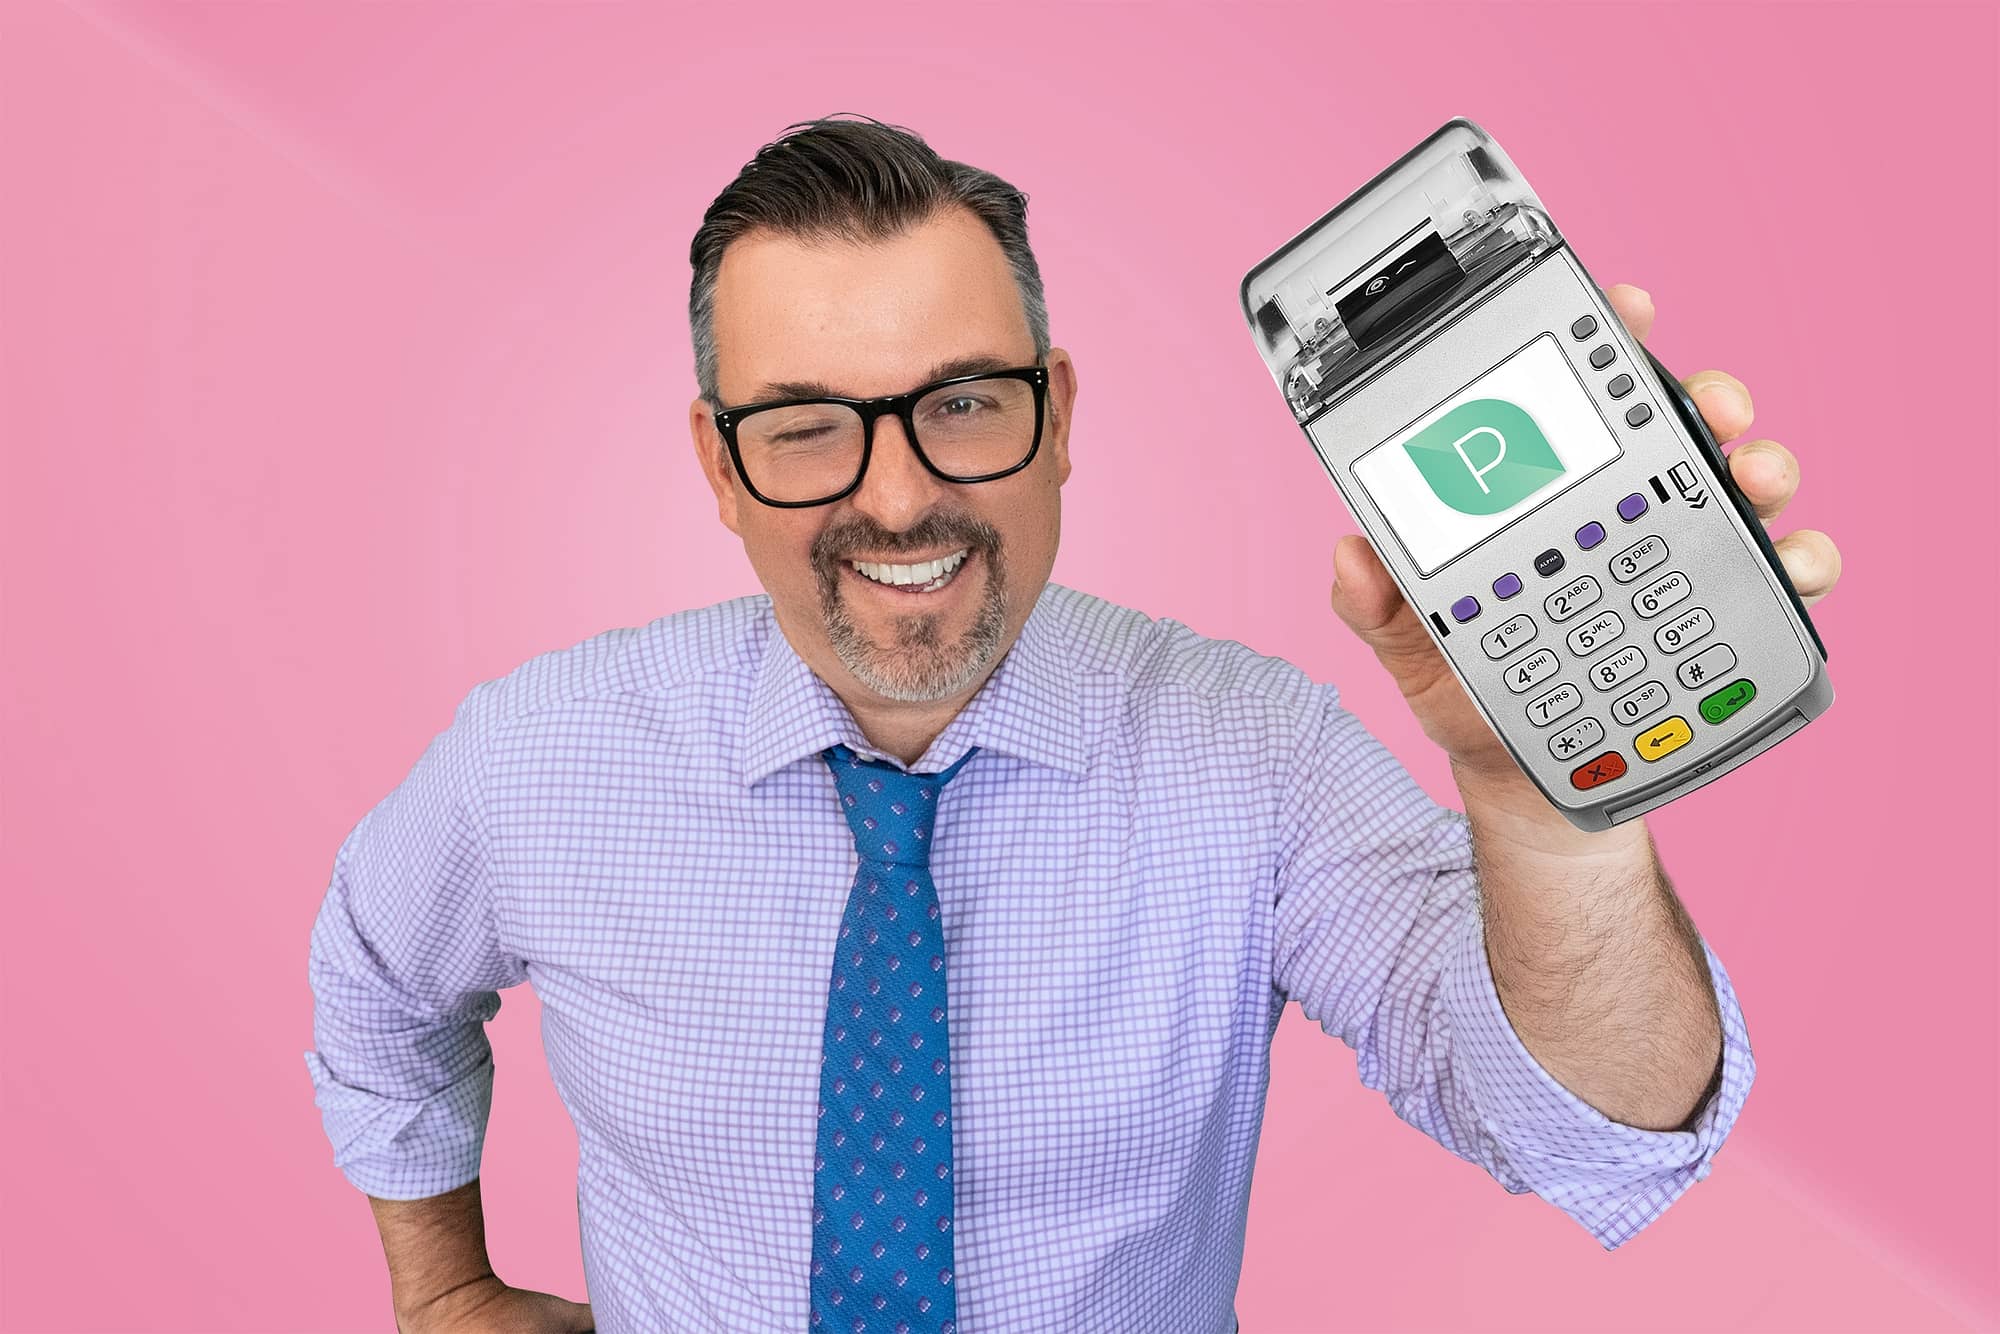 Matt smiling holding up credit card machine on a pink background